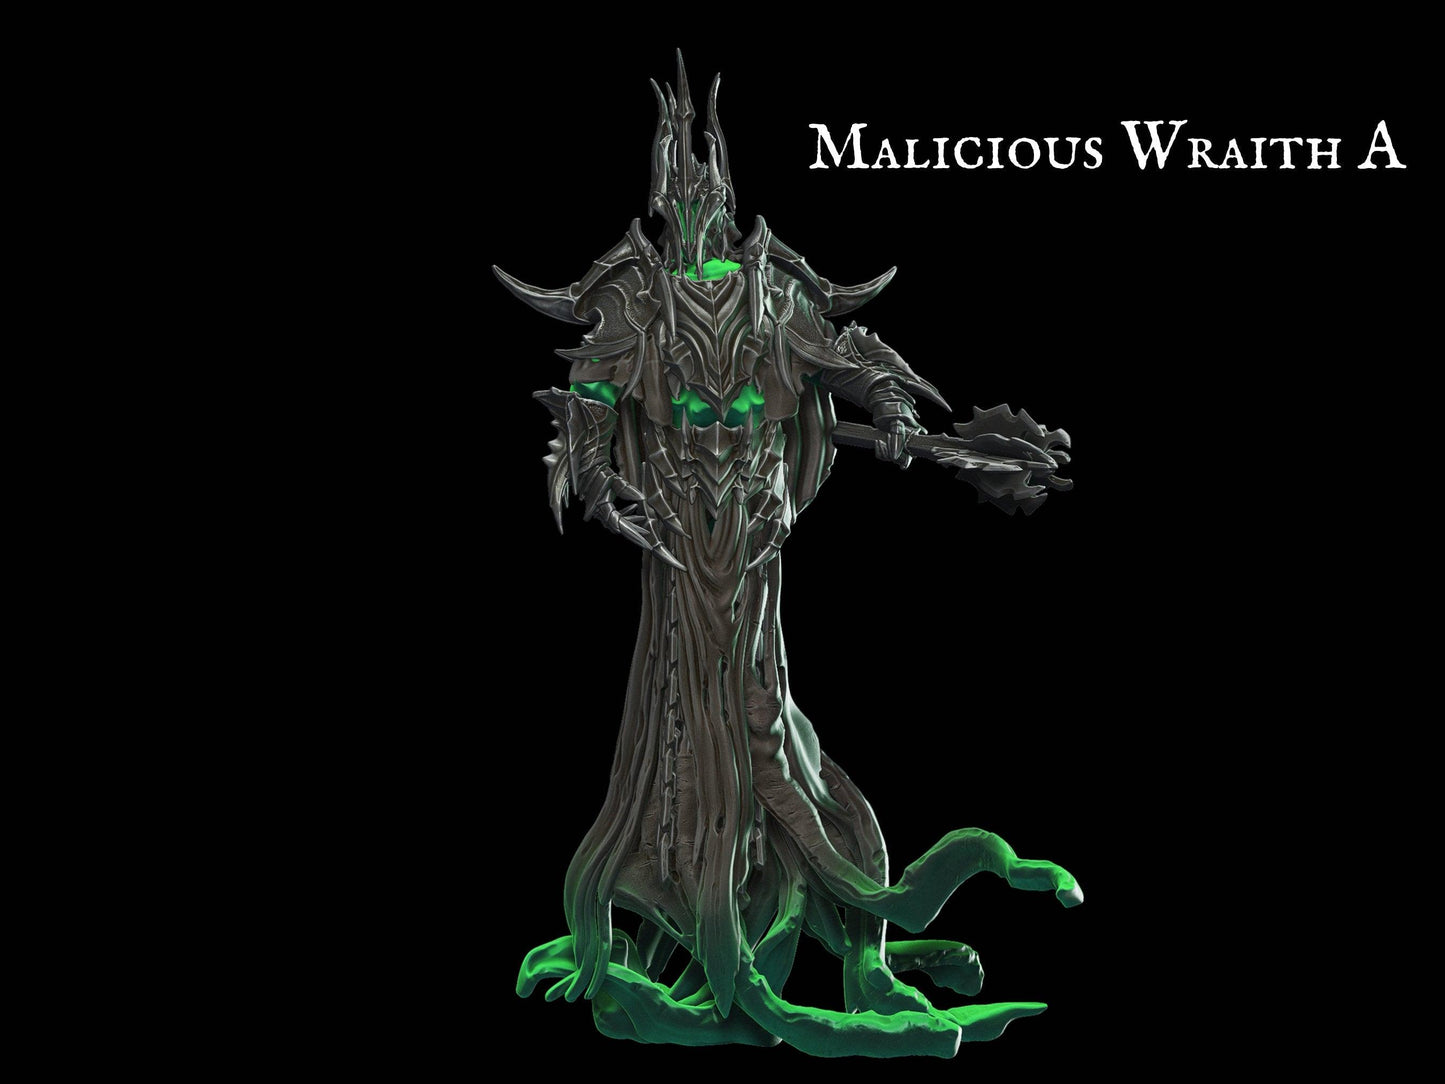 Malicious Wraith Miniature - 3 Poses - 28mm scale Tabletop gaming DnD Miniature Dungeons and Dragons, dnd 5e dungeon master gift - Plague Miniatures shop for DnD Miniatures